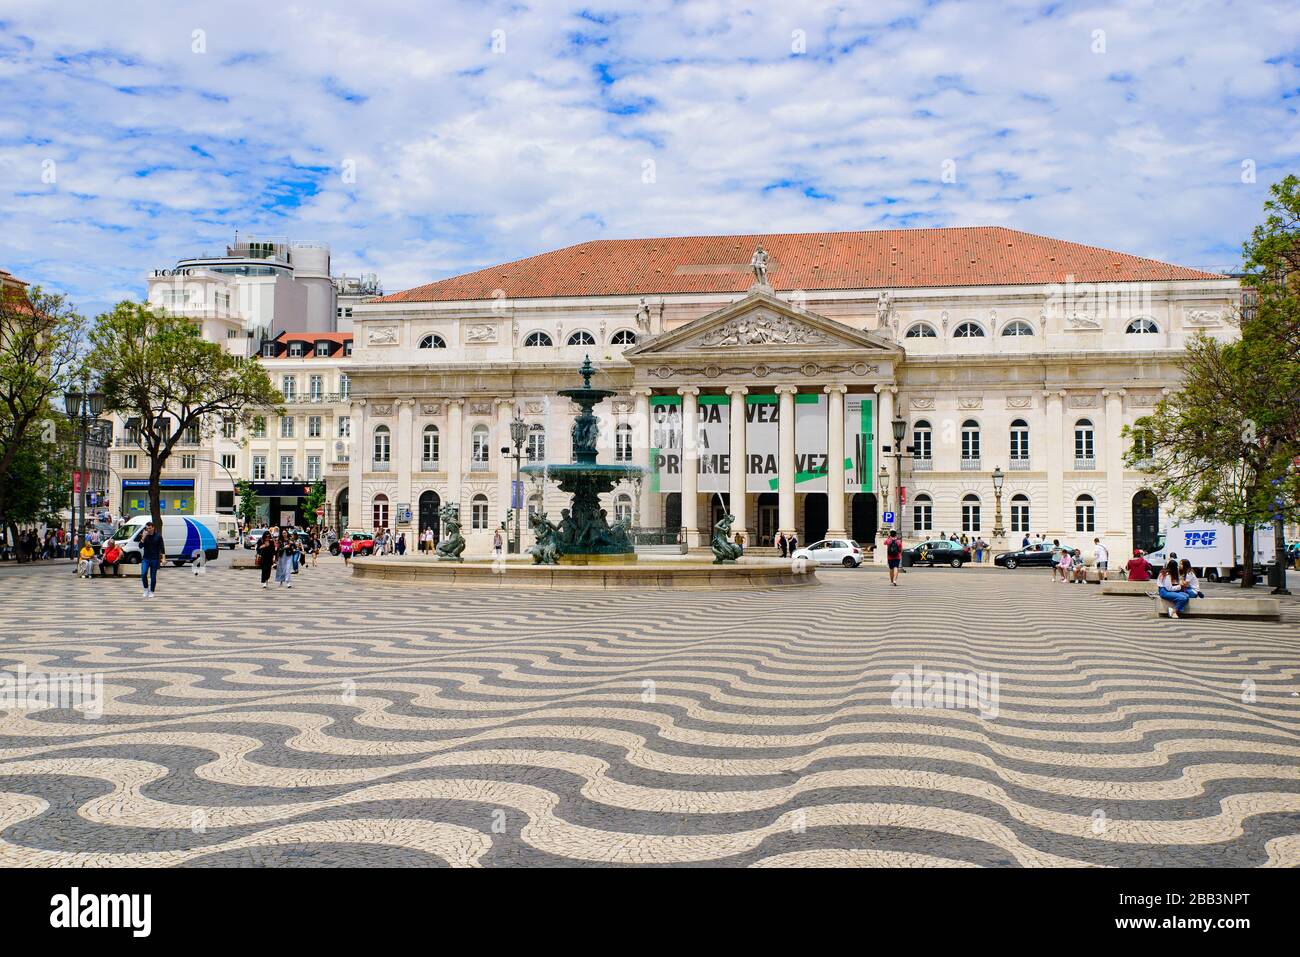 The national theater on Rossio Square in Lisbon, Portugal Stock Photo